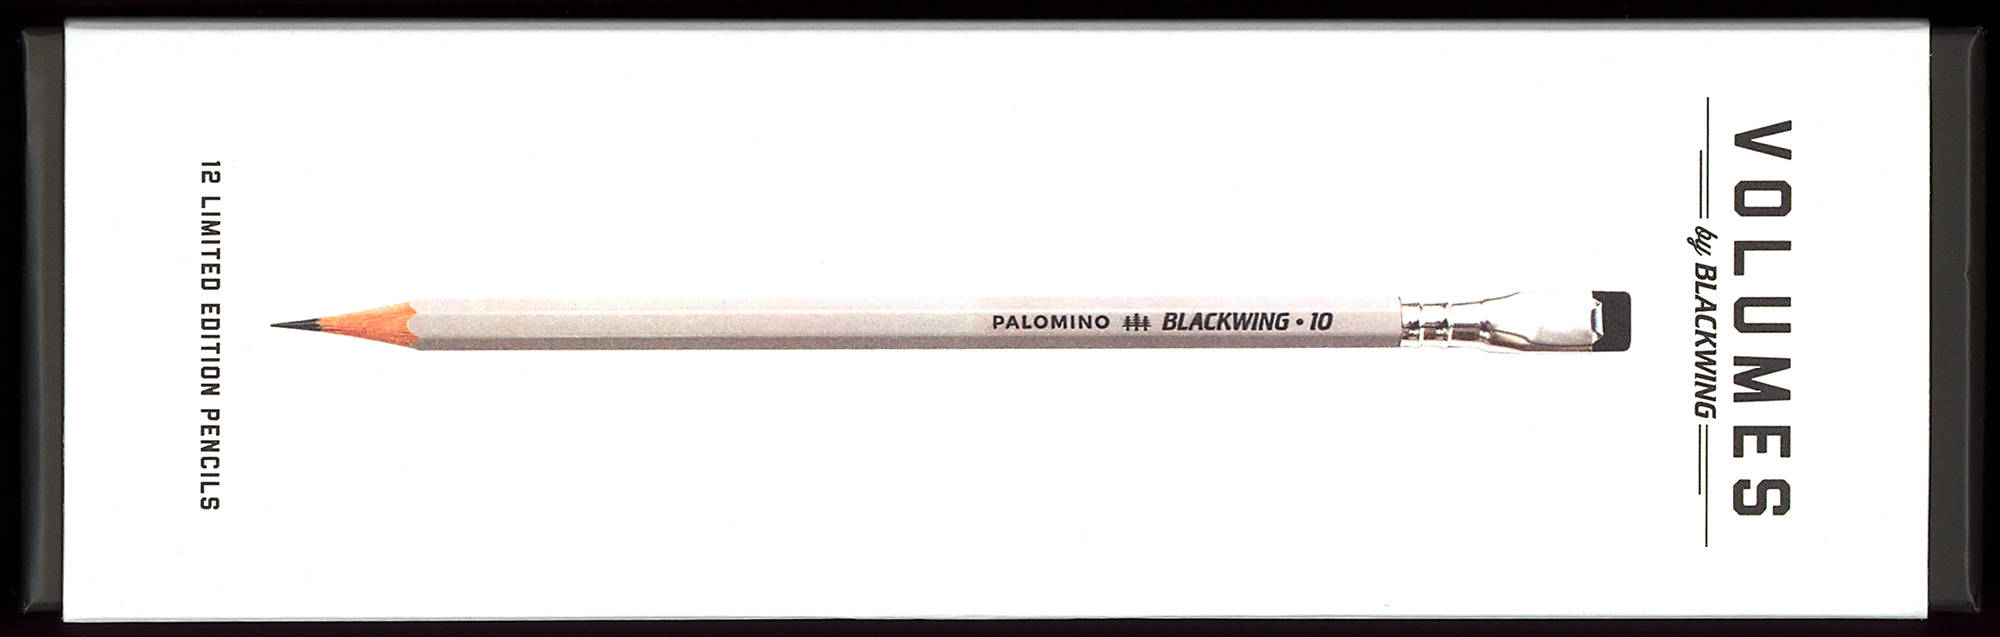 Blackwing Vol 10 Limited Edition EXTRA Firm Graphite Palomino Pencils 